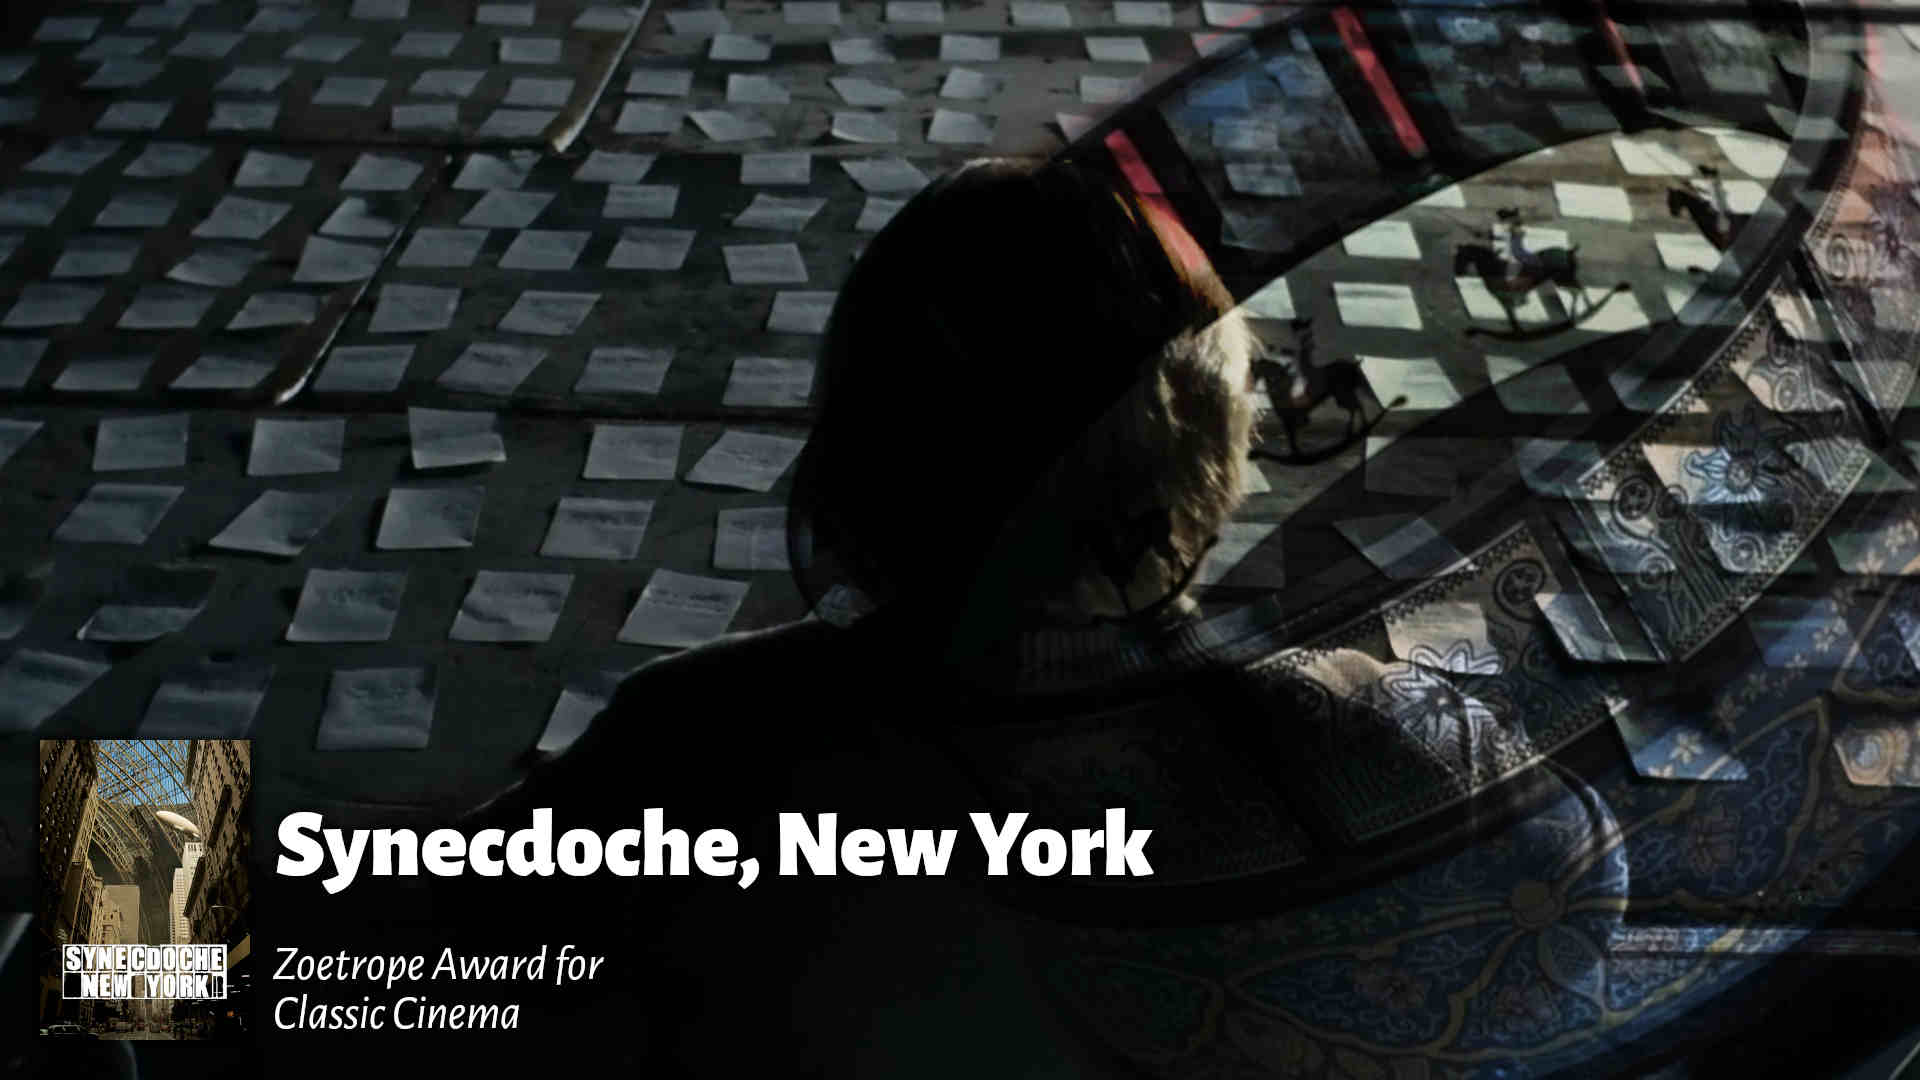 And the award goes to… Synecdoche, New York!